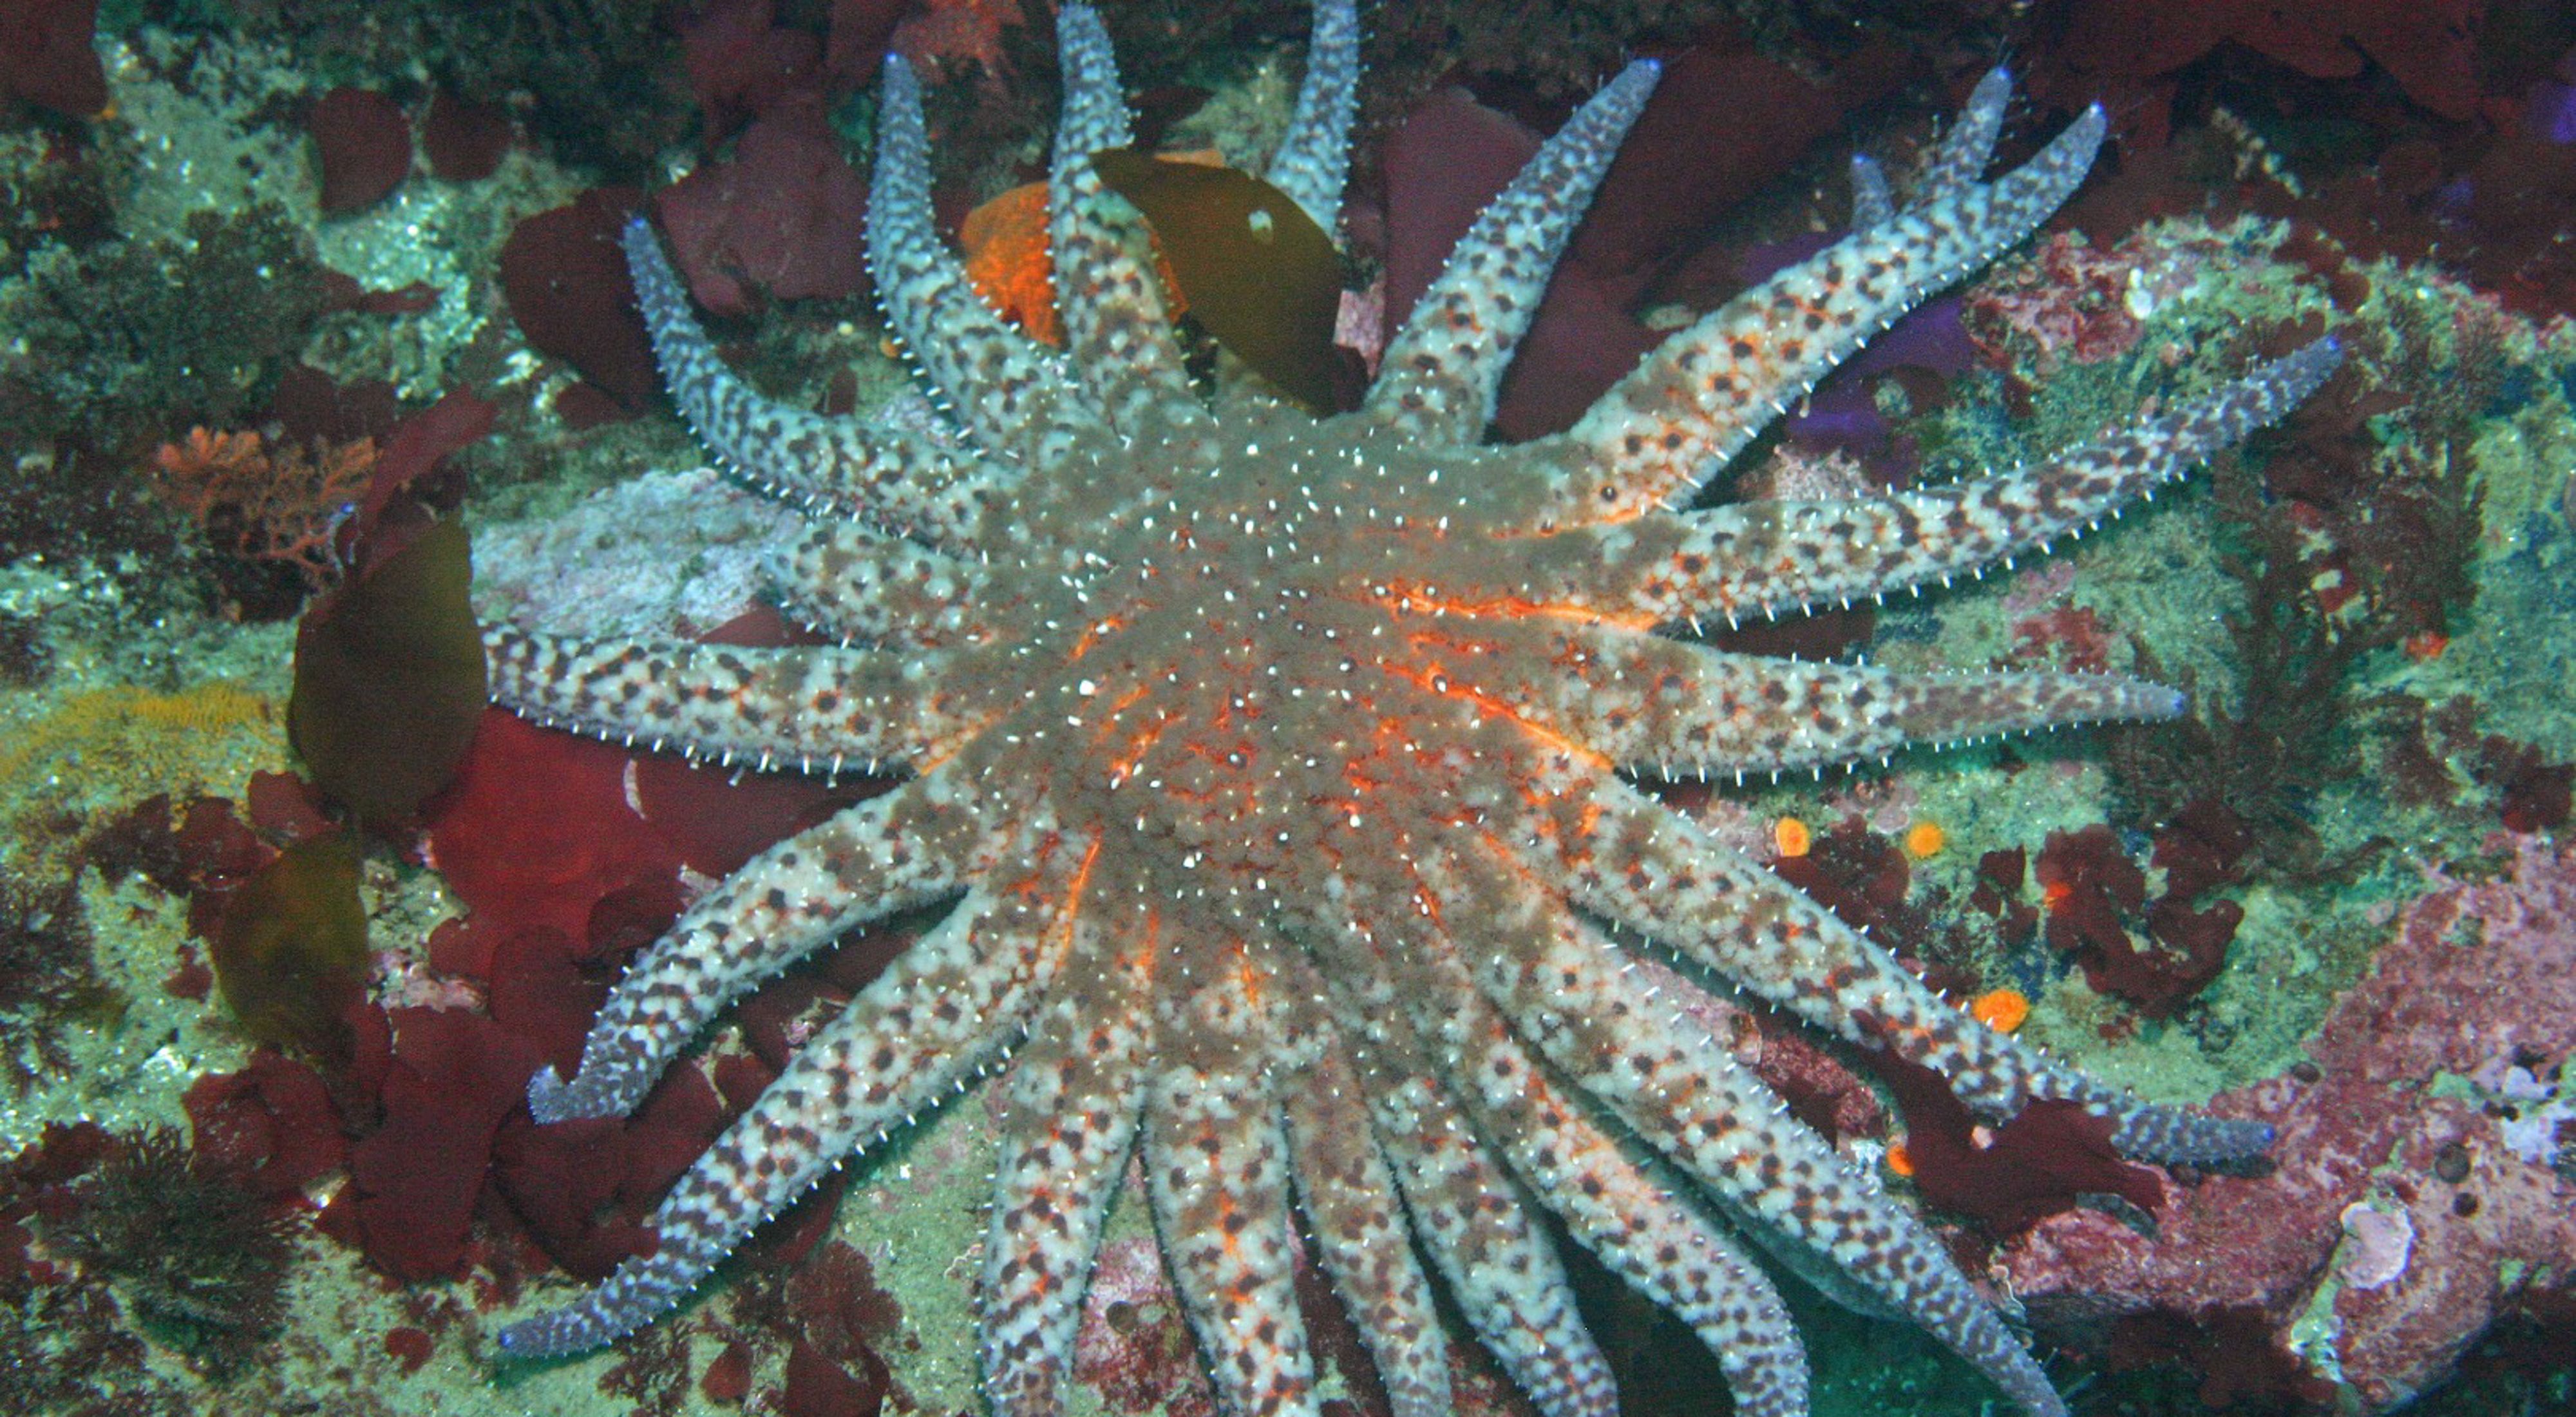 A sunflower star: a blue and brown mottled sea star with about twenty arms and short white spikes on its arms and body.